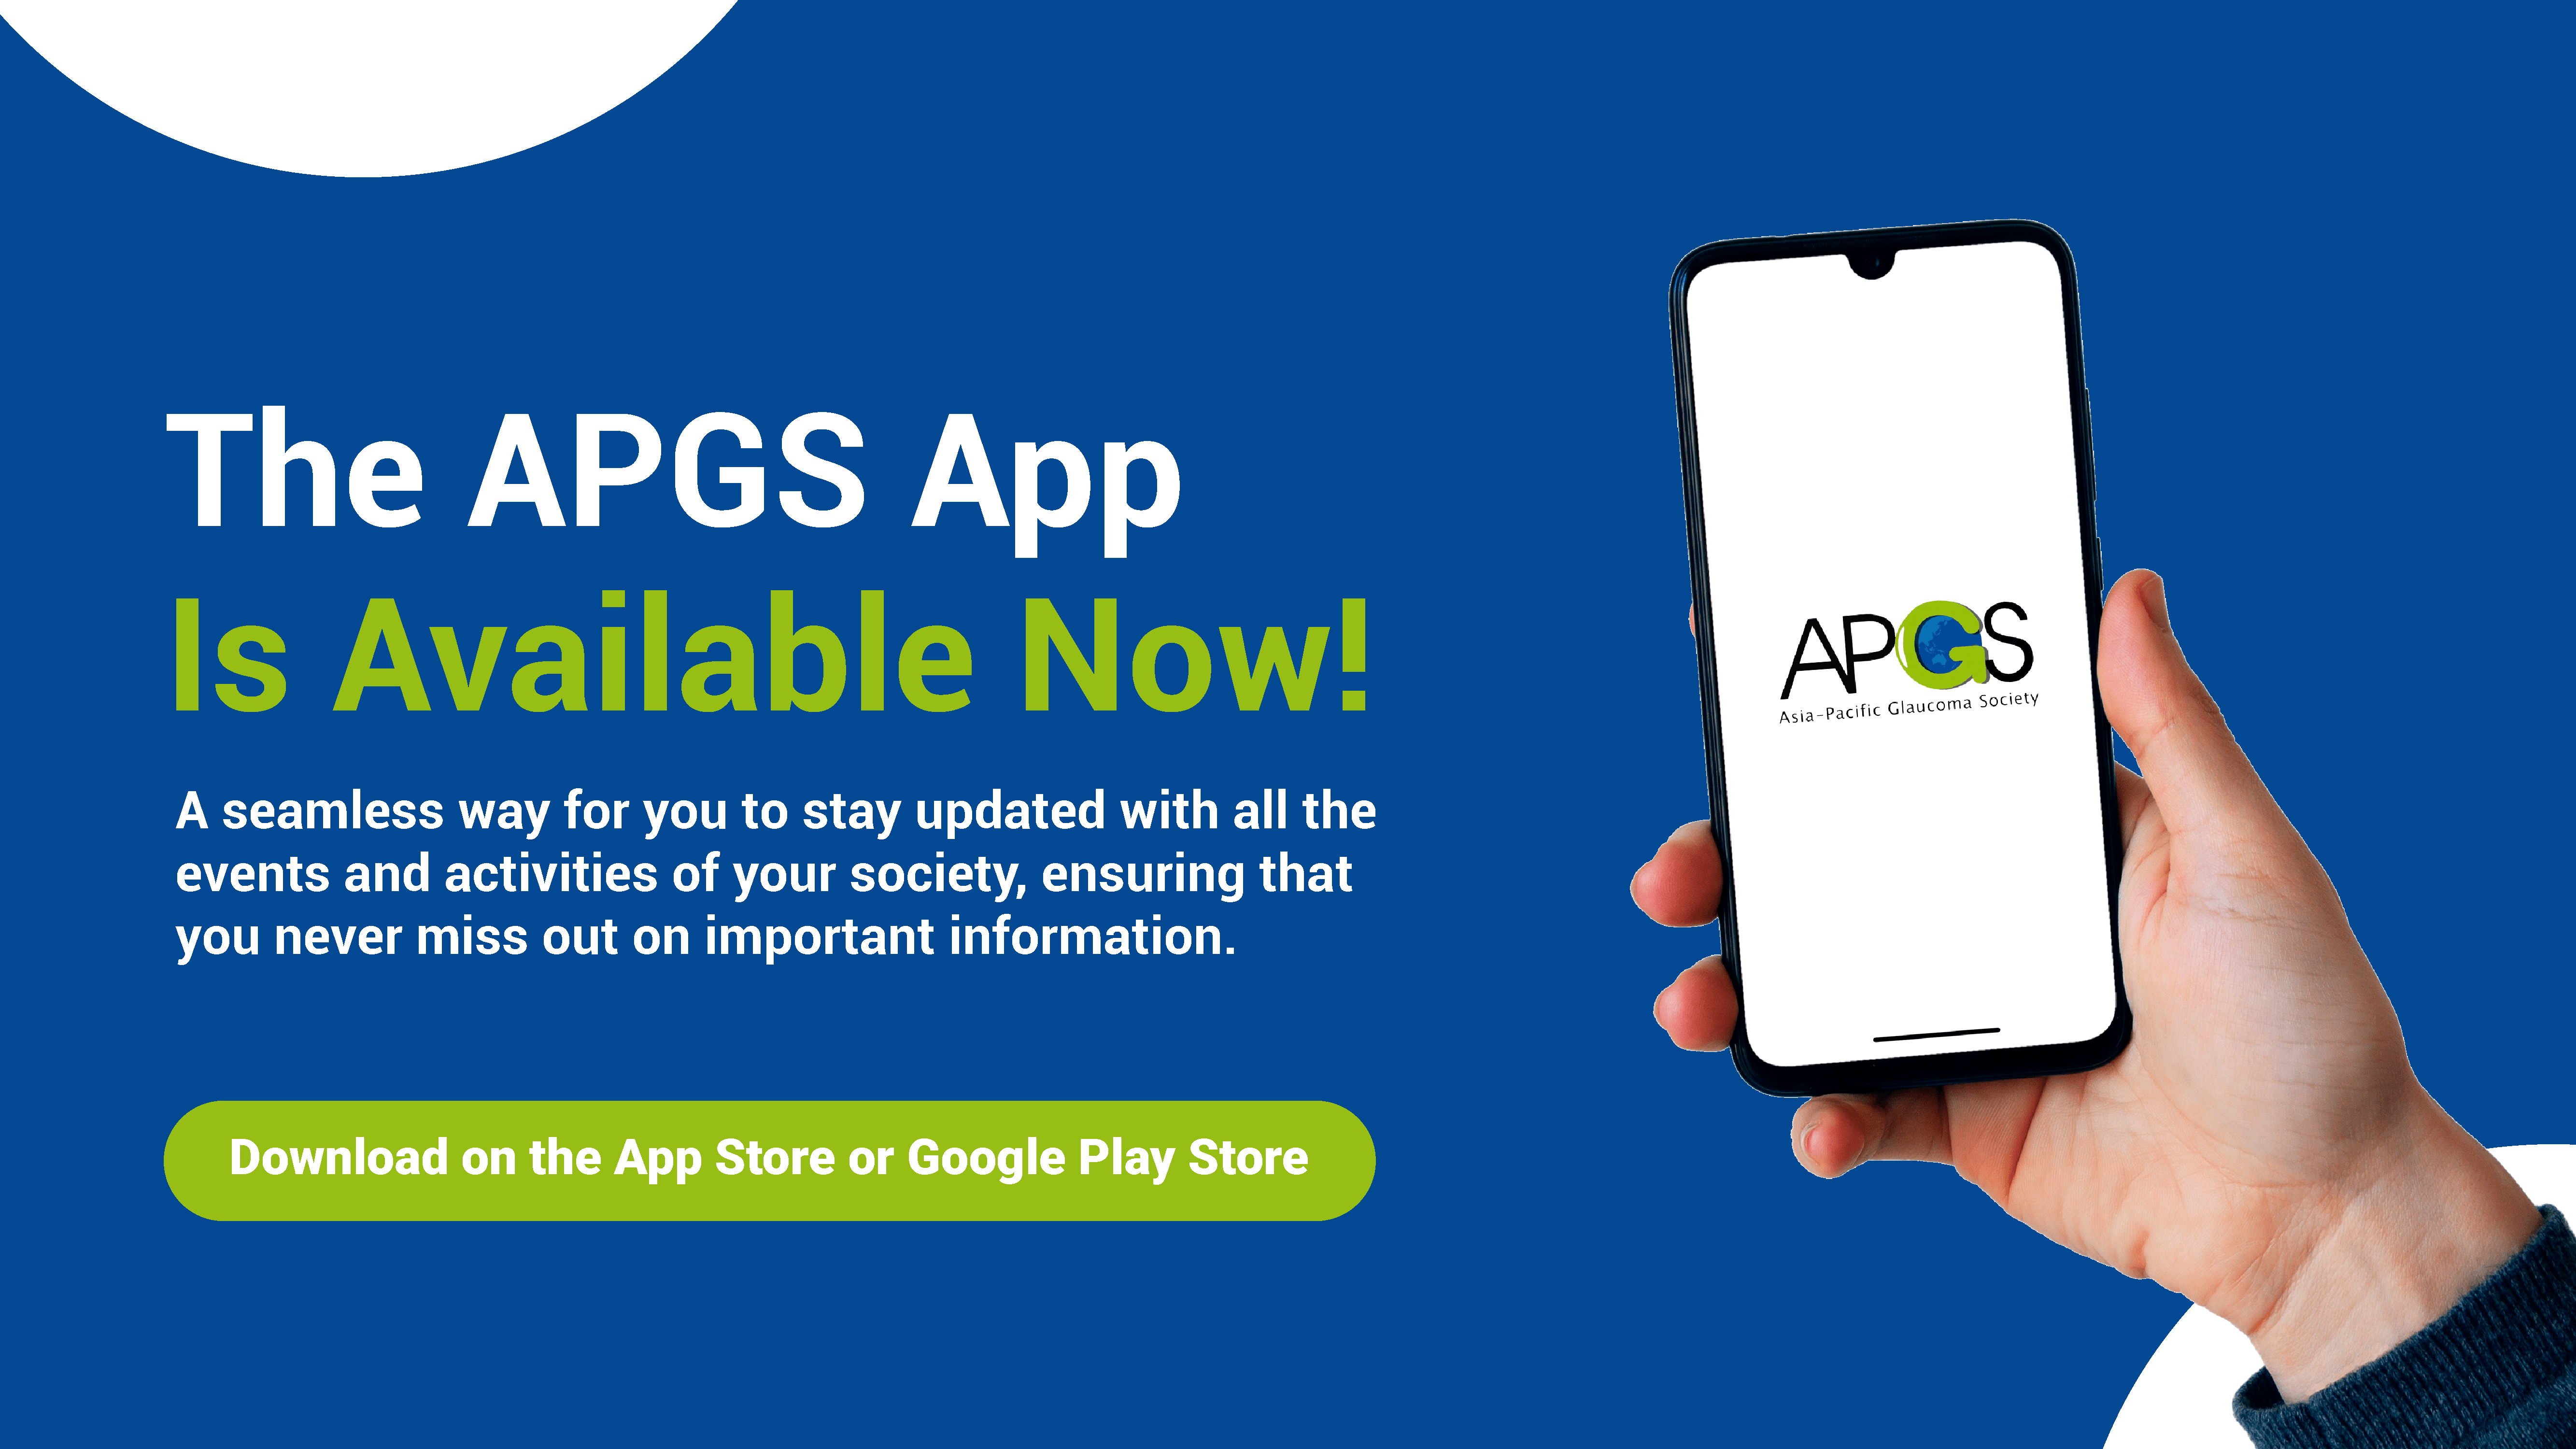 APGS App available now